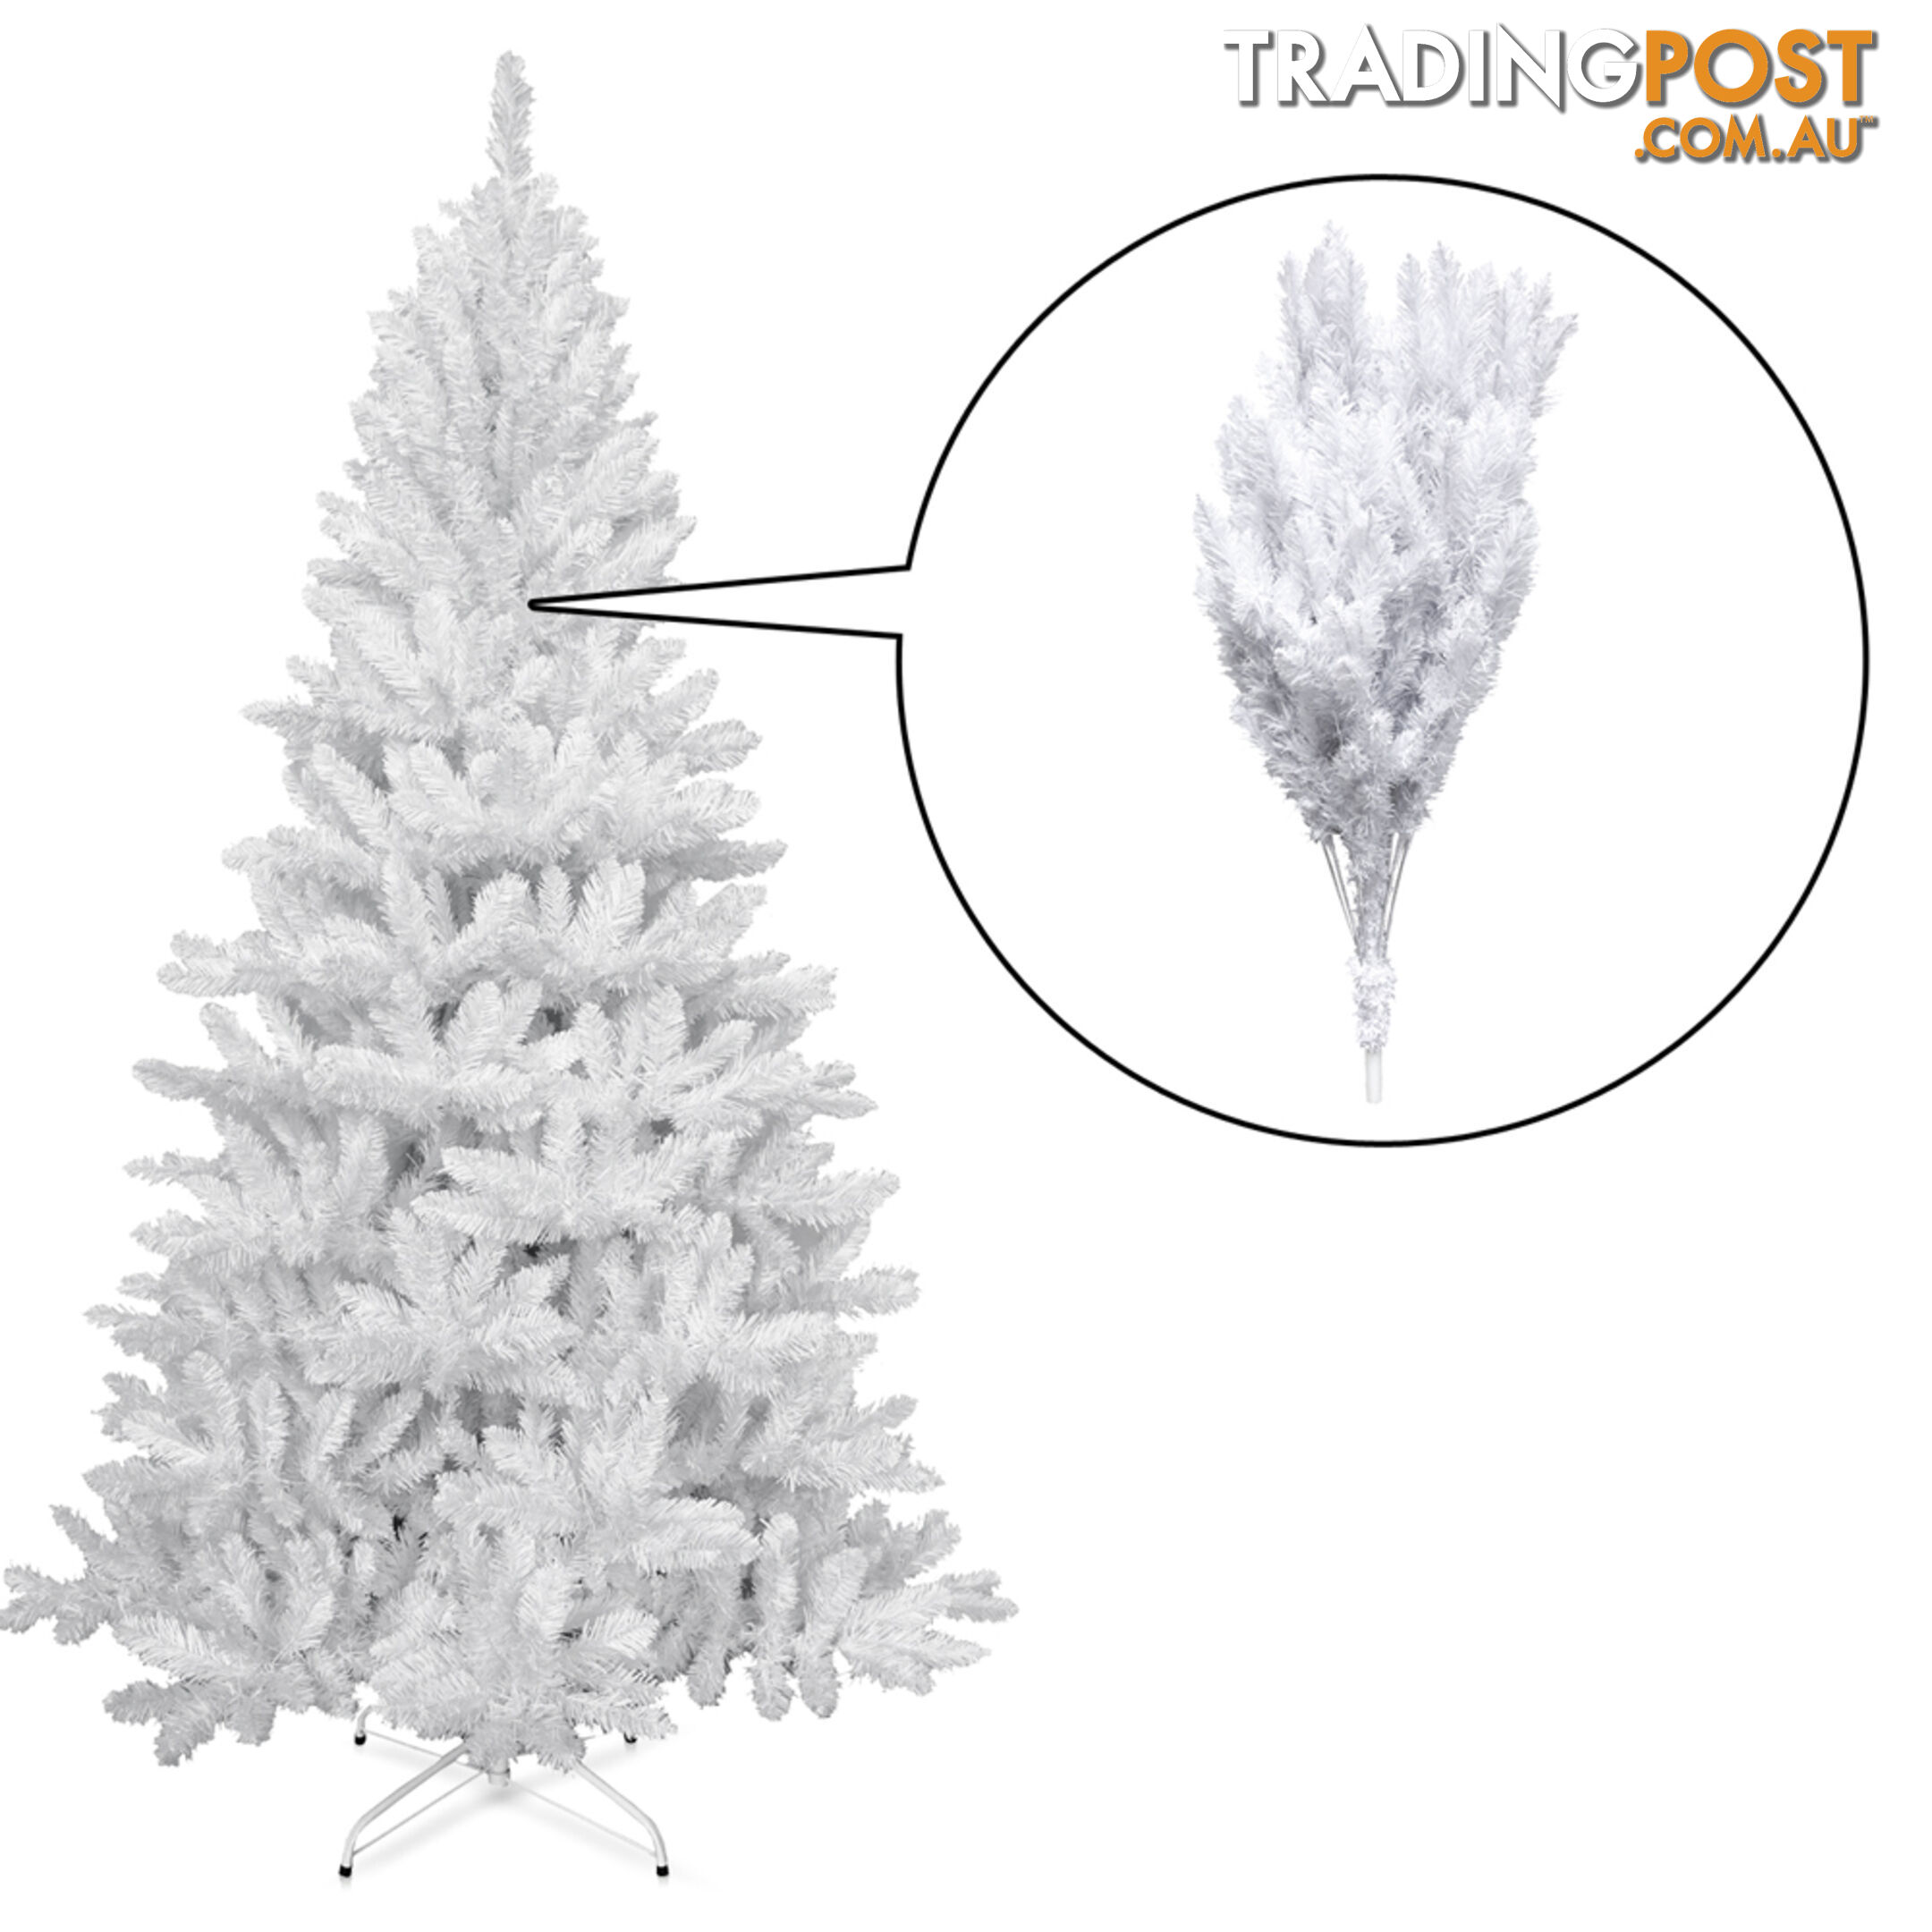 1.8M Christmas Tree With Decorations - White